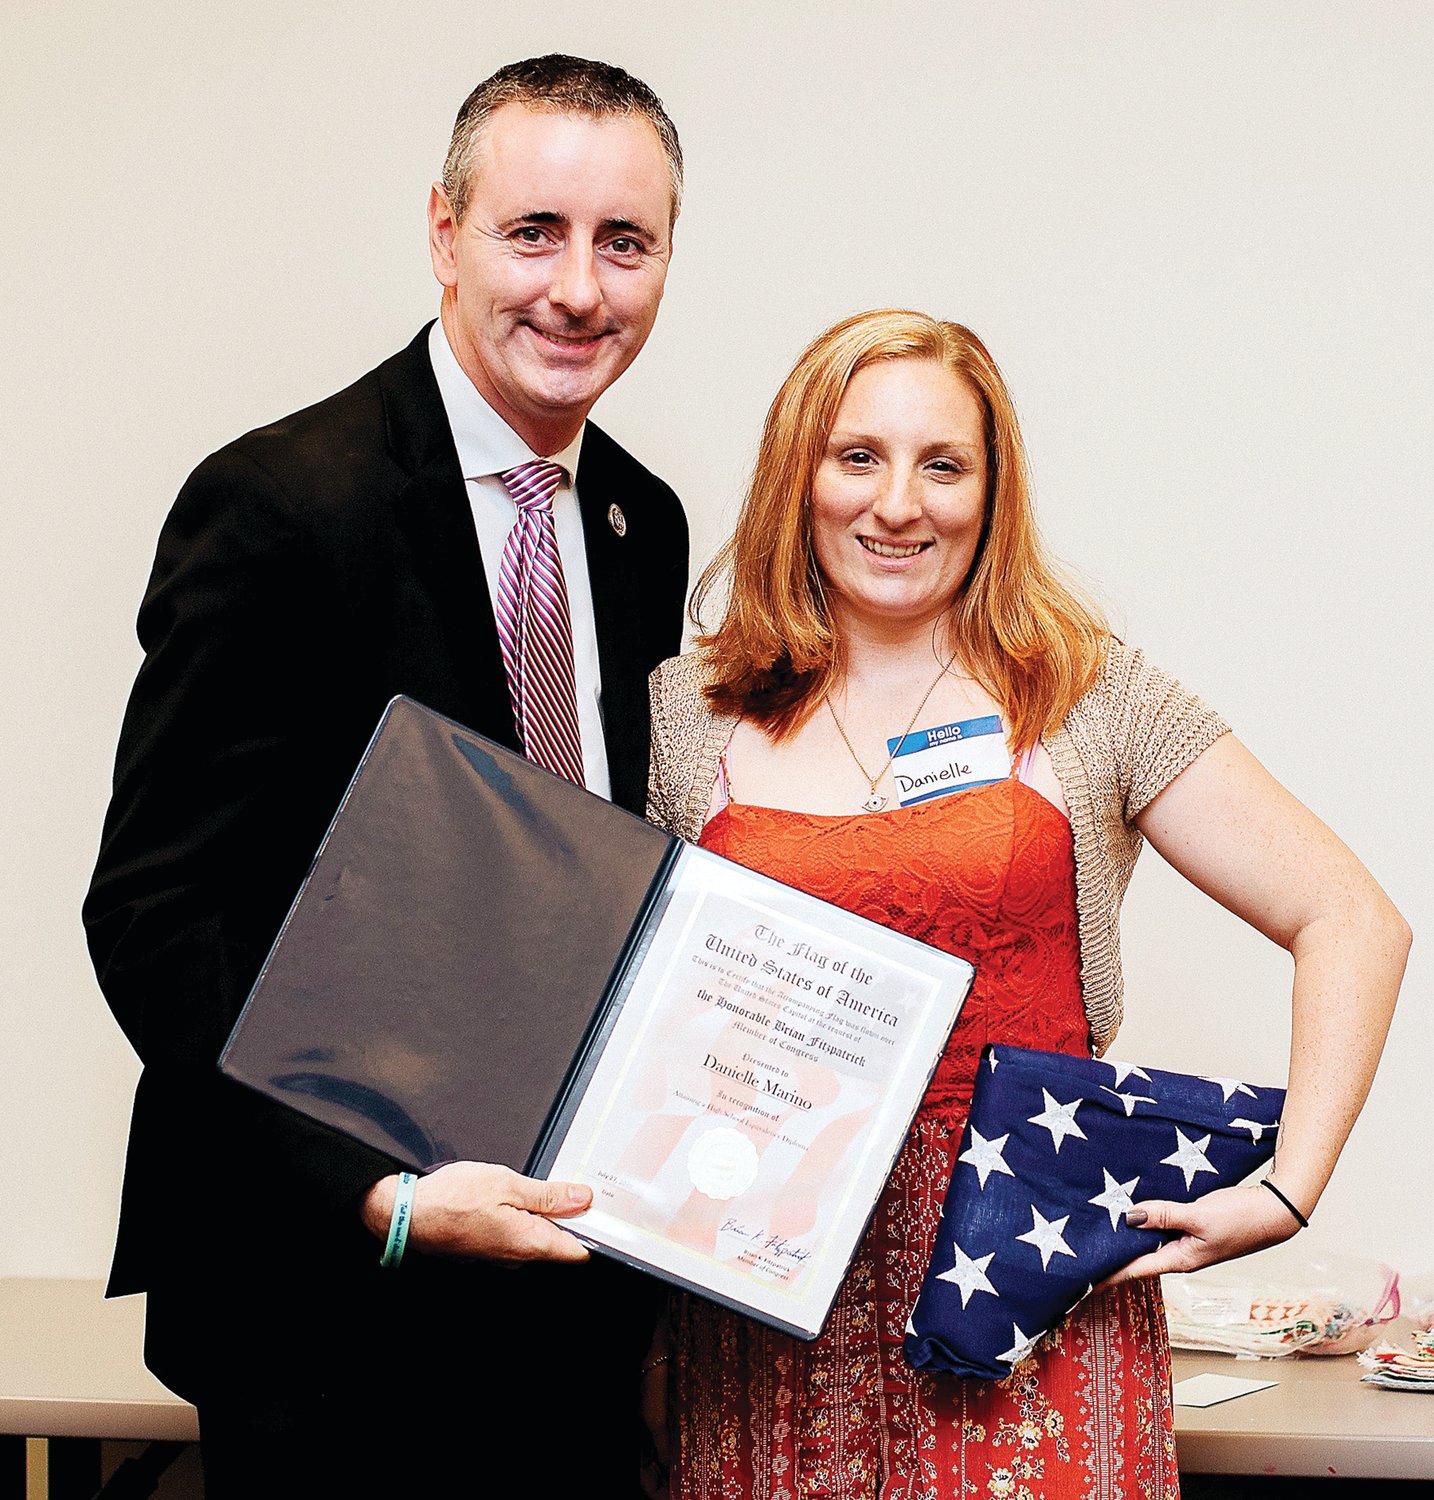 U. S. Rep. Brian FitzPatrick, R-Bucks, presents a citation and U.S. Flag to a Vita student in recognition of achieving her High School Equivalency diploma.